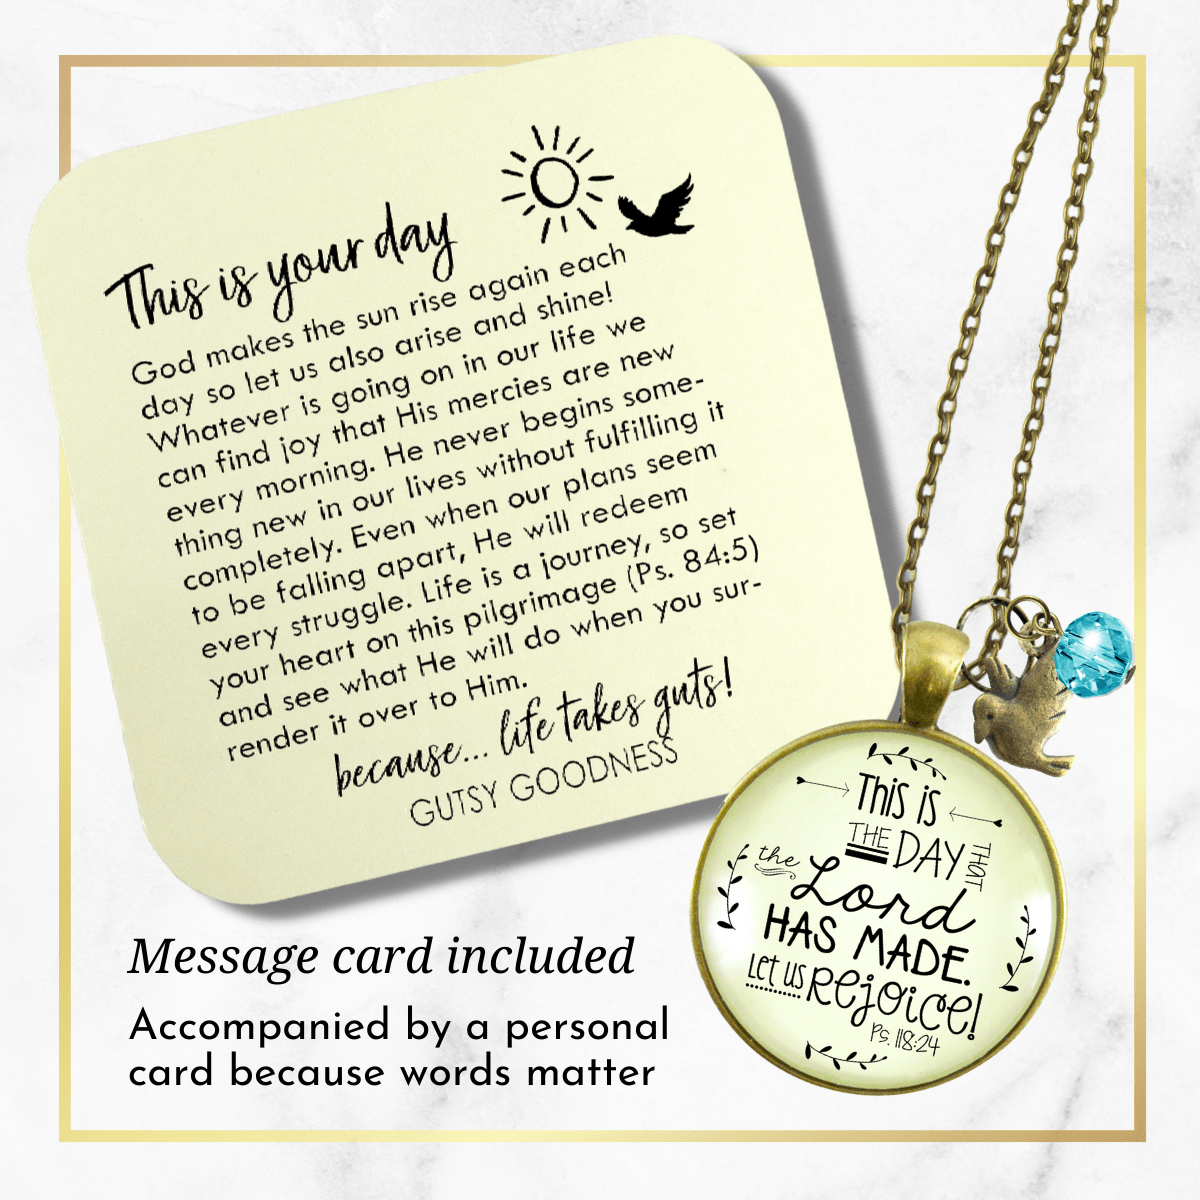 Gutsy Goodness This is the Day Necklace Lord Made Christian Quote Faith Jewelry - Gutsy Goodness;This Is The Day Necklace Lord Made Christian Quote Faith Jewelry - Gutsy Goodness Handmade Jewelry Gifts